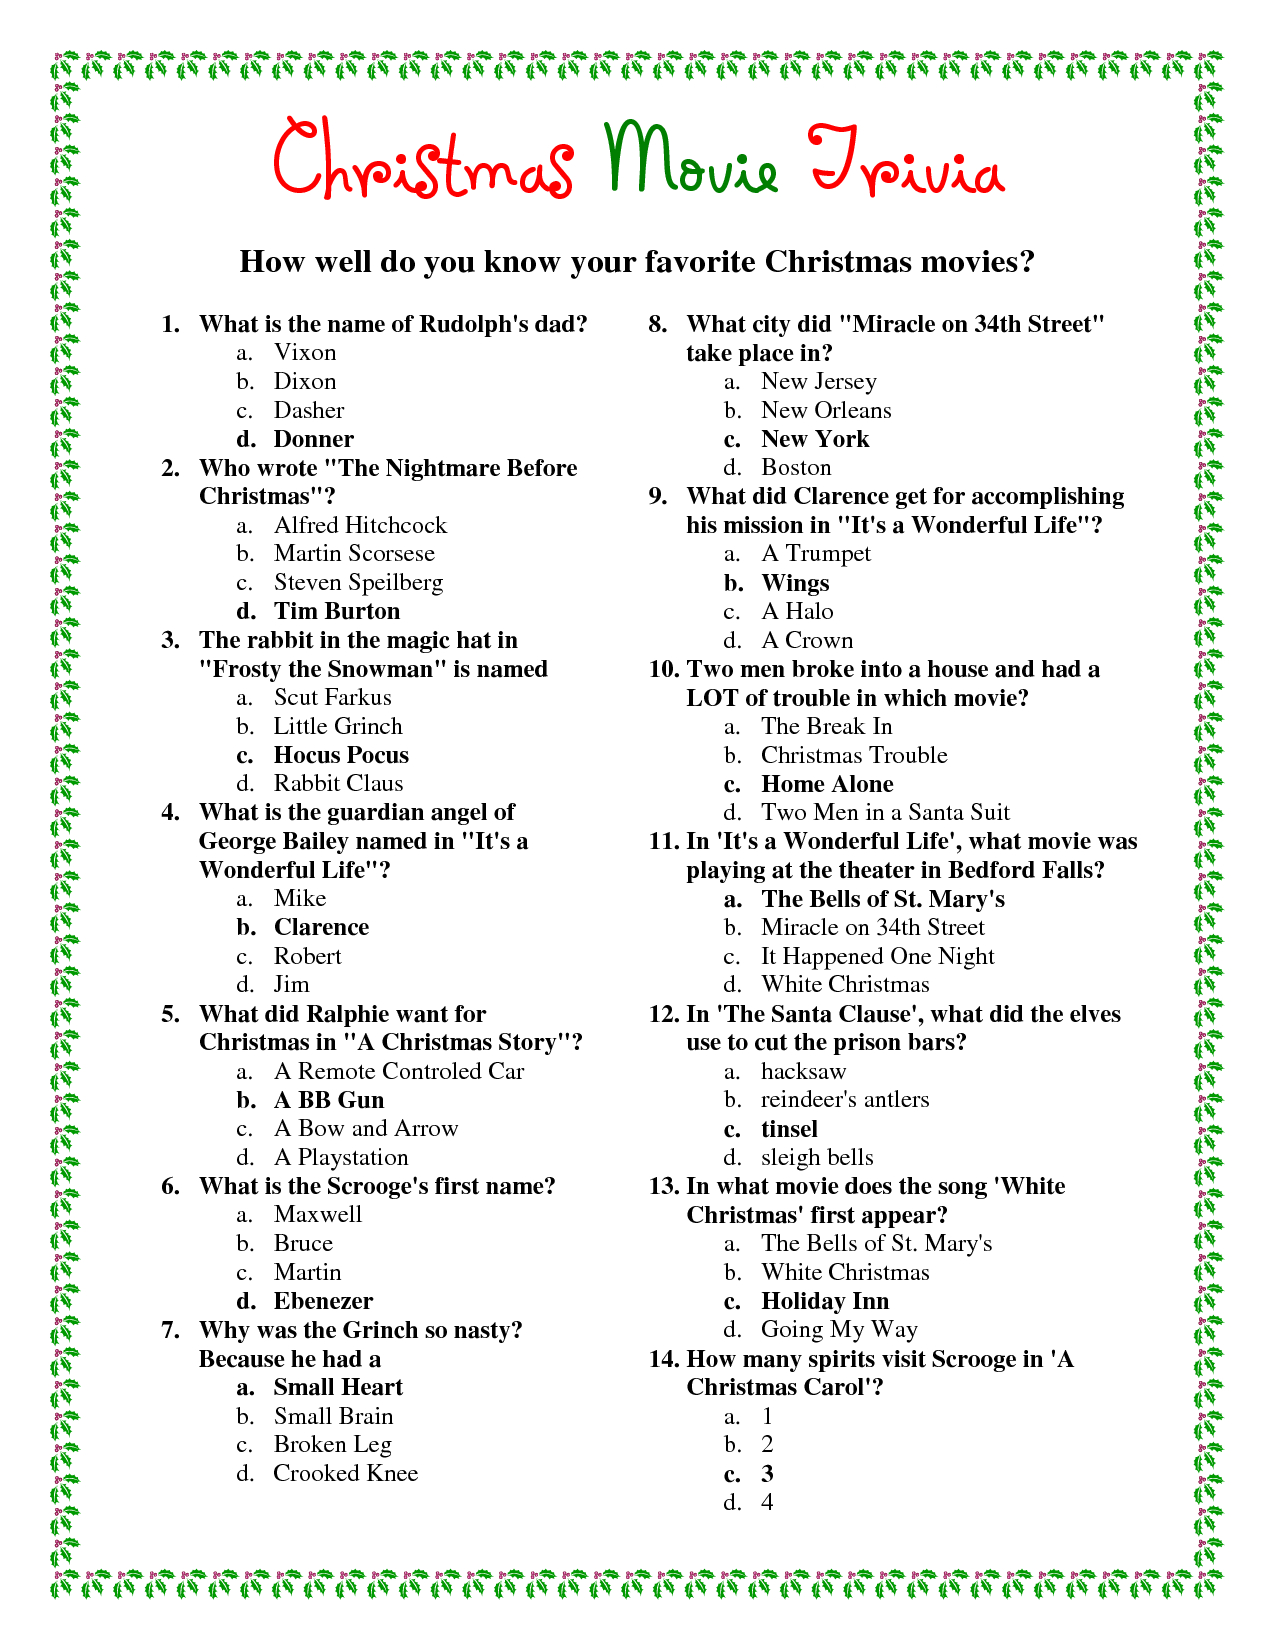 Ideas Collection Easy Christmas Trivia Questions And Answers - Free Christmas Picture Quiz Questions And Answers Printable